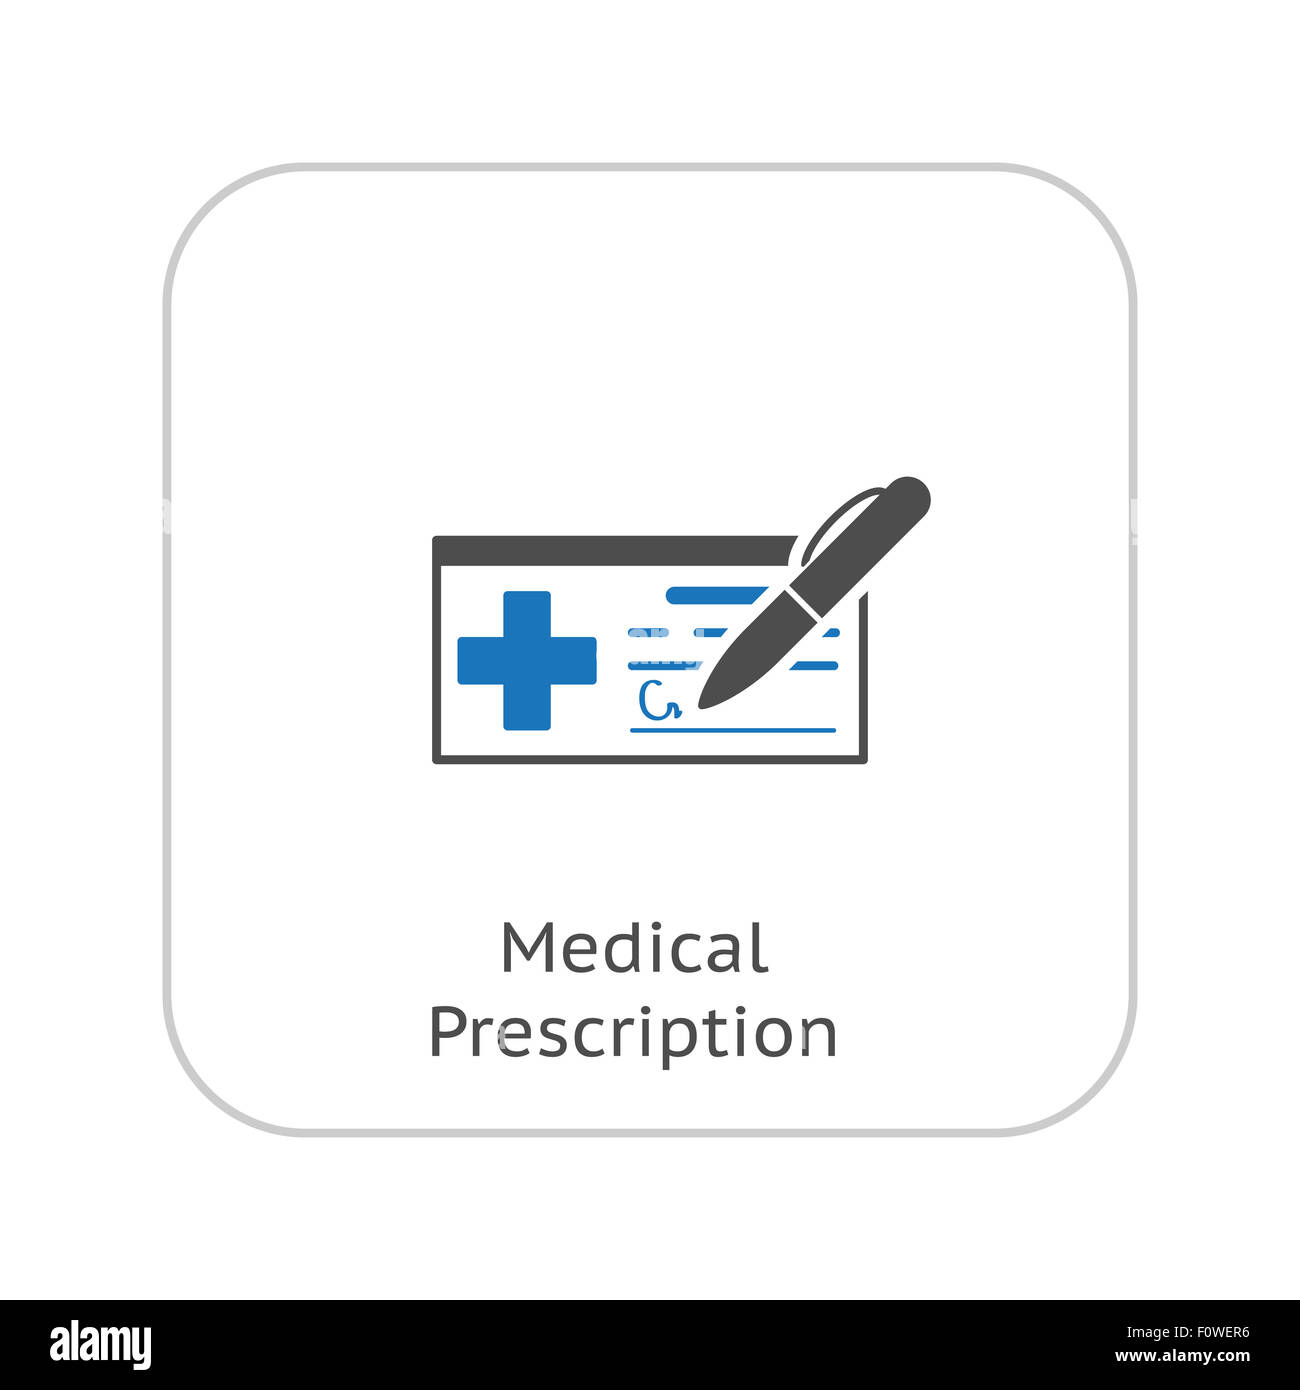 Medical Prescription and Medical Services Icon. Flat Design. Isolated. Stock Photo